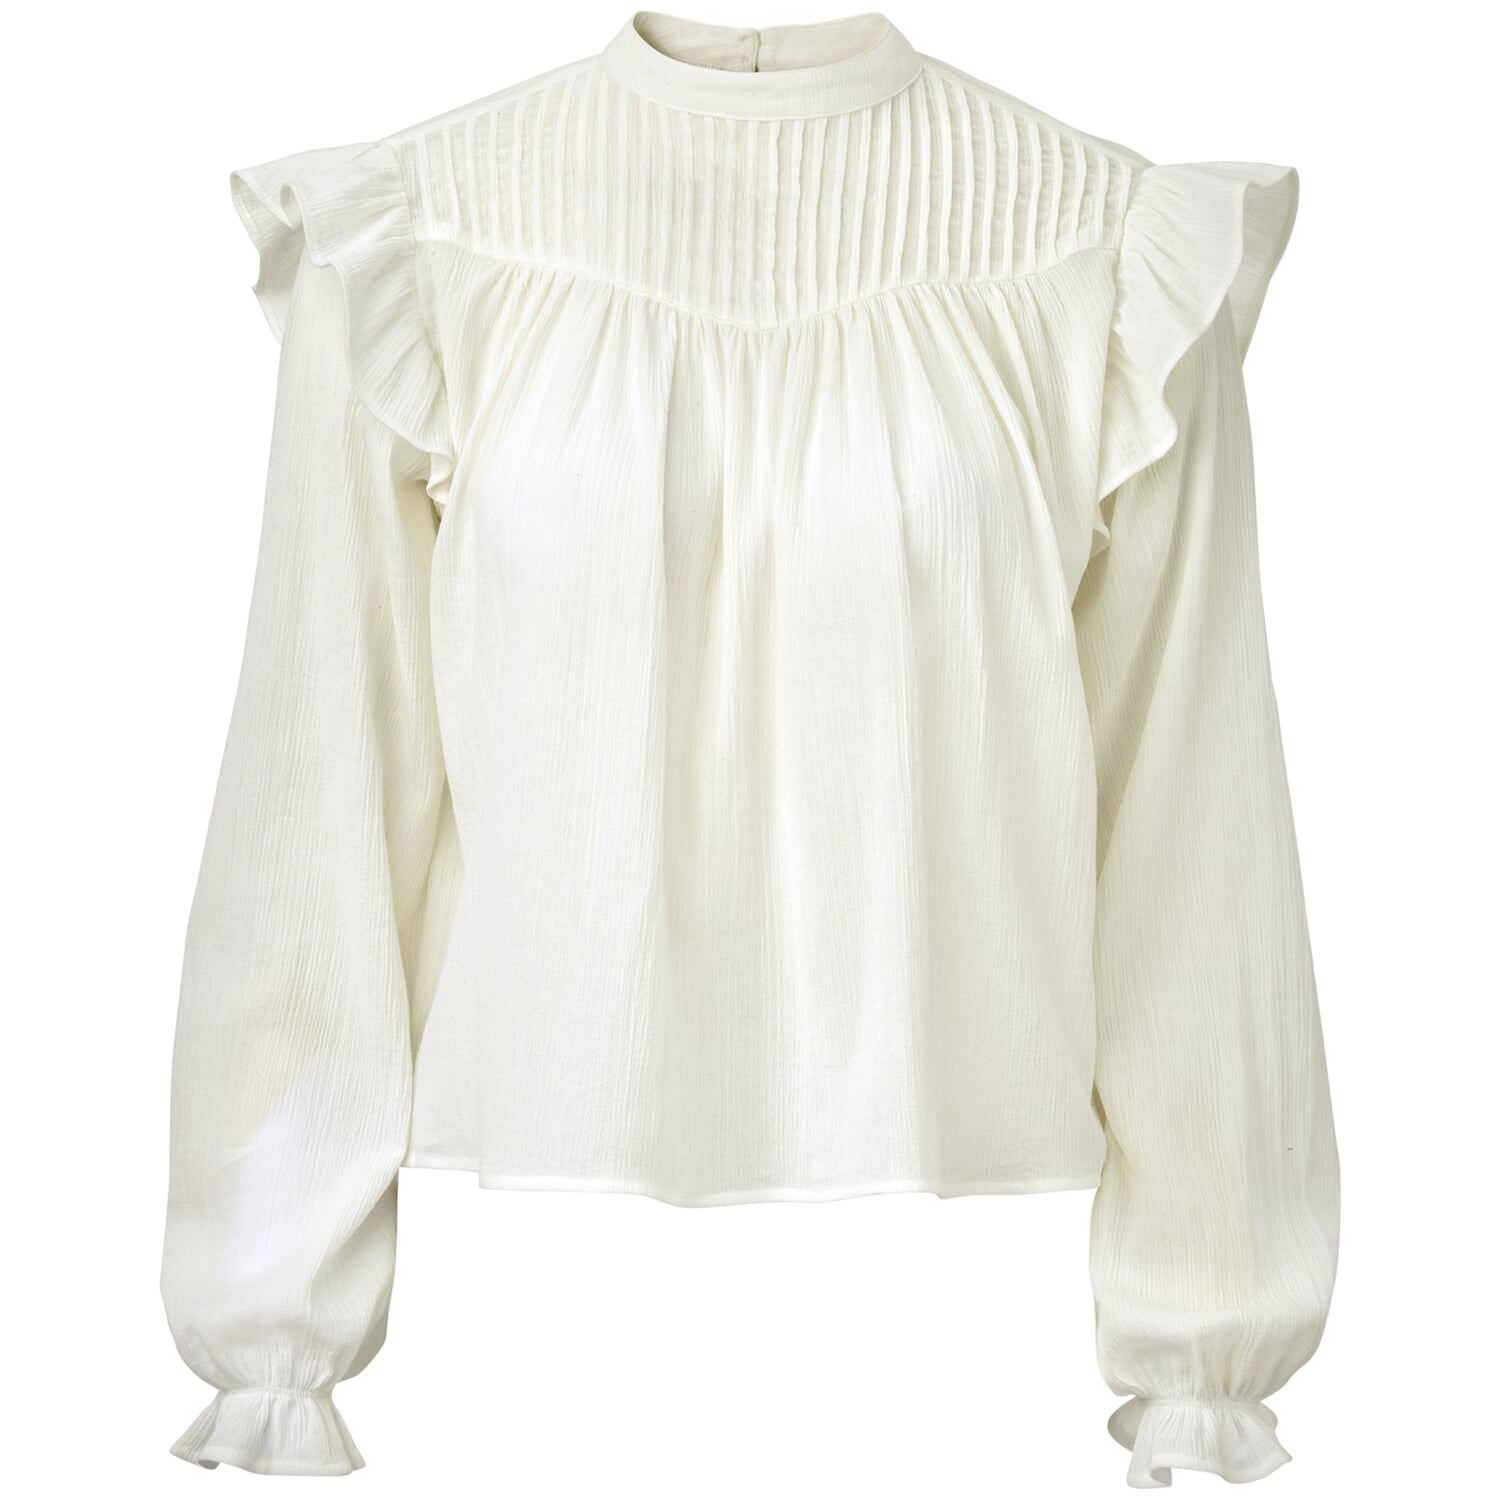 Pleated blouse with ruffles - Women